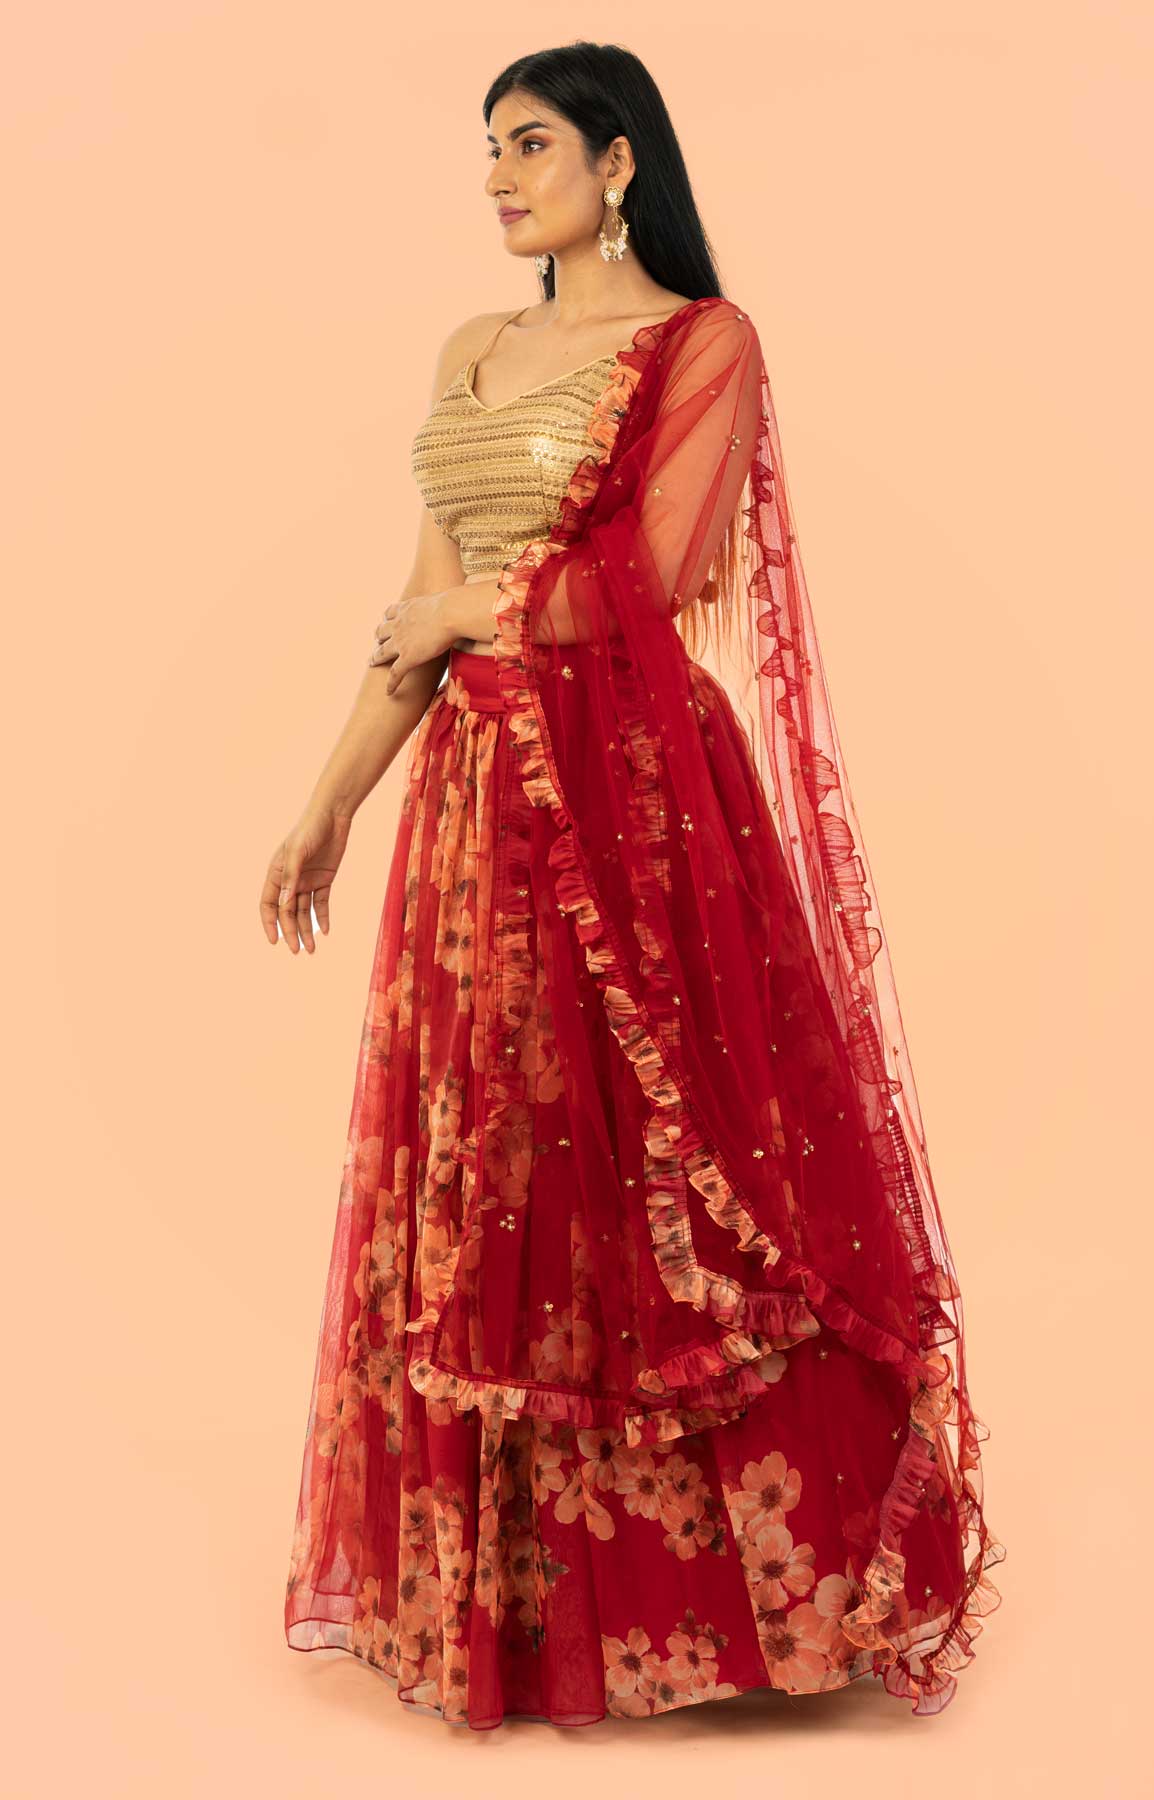 Poppy Red Lehenga In Mustard Floral Motif Print Matched With Golden Embroidered Blouse – Viraaya By Ushnakmals